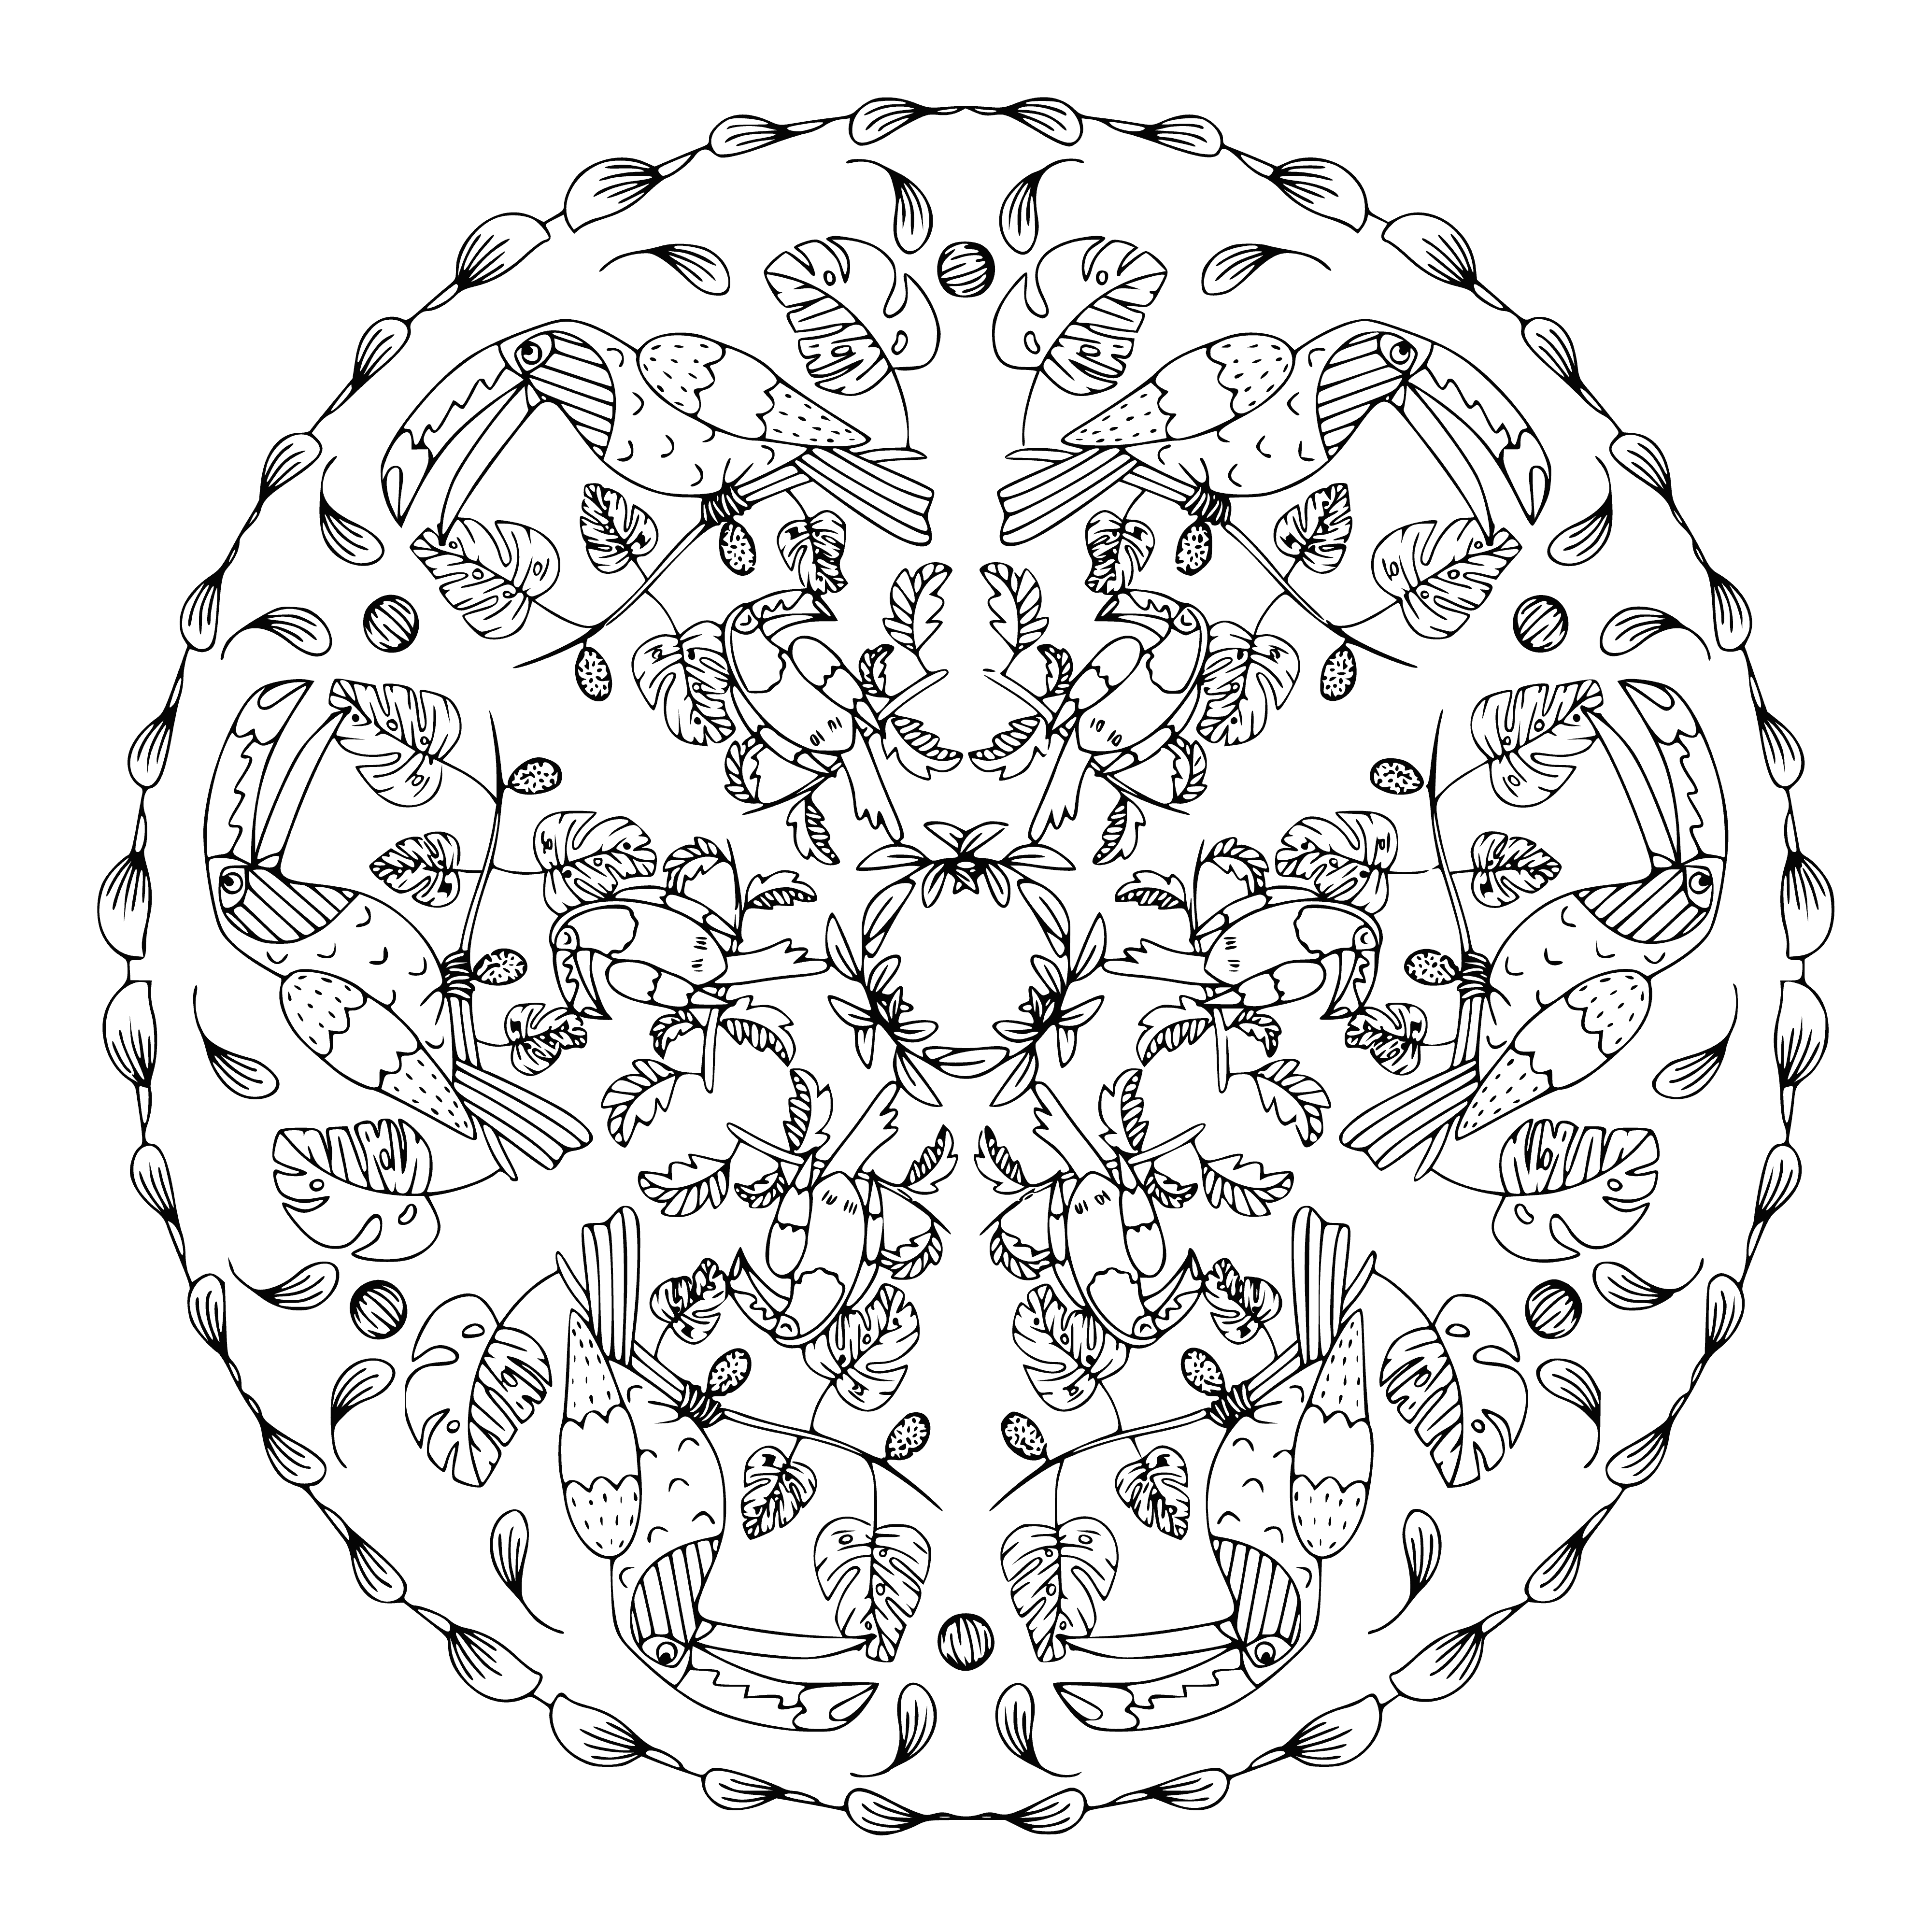 coloring page: Toucans in the center of a colorful rainforest mandala make this coloring page perfect for lovers of South America's tropical forests! #coloring